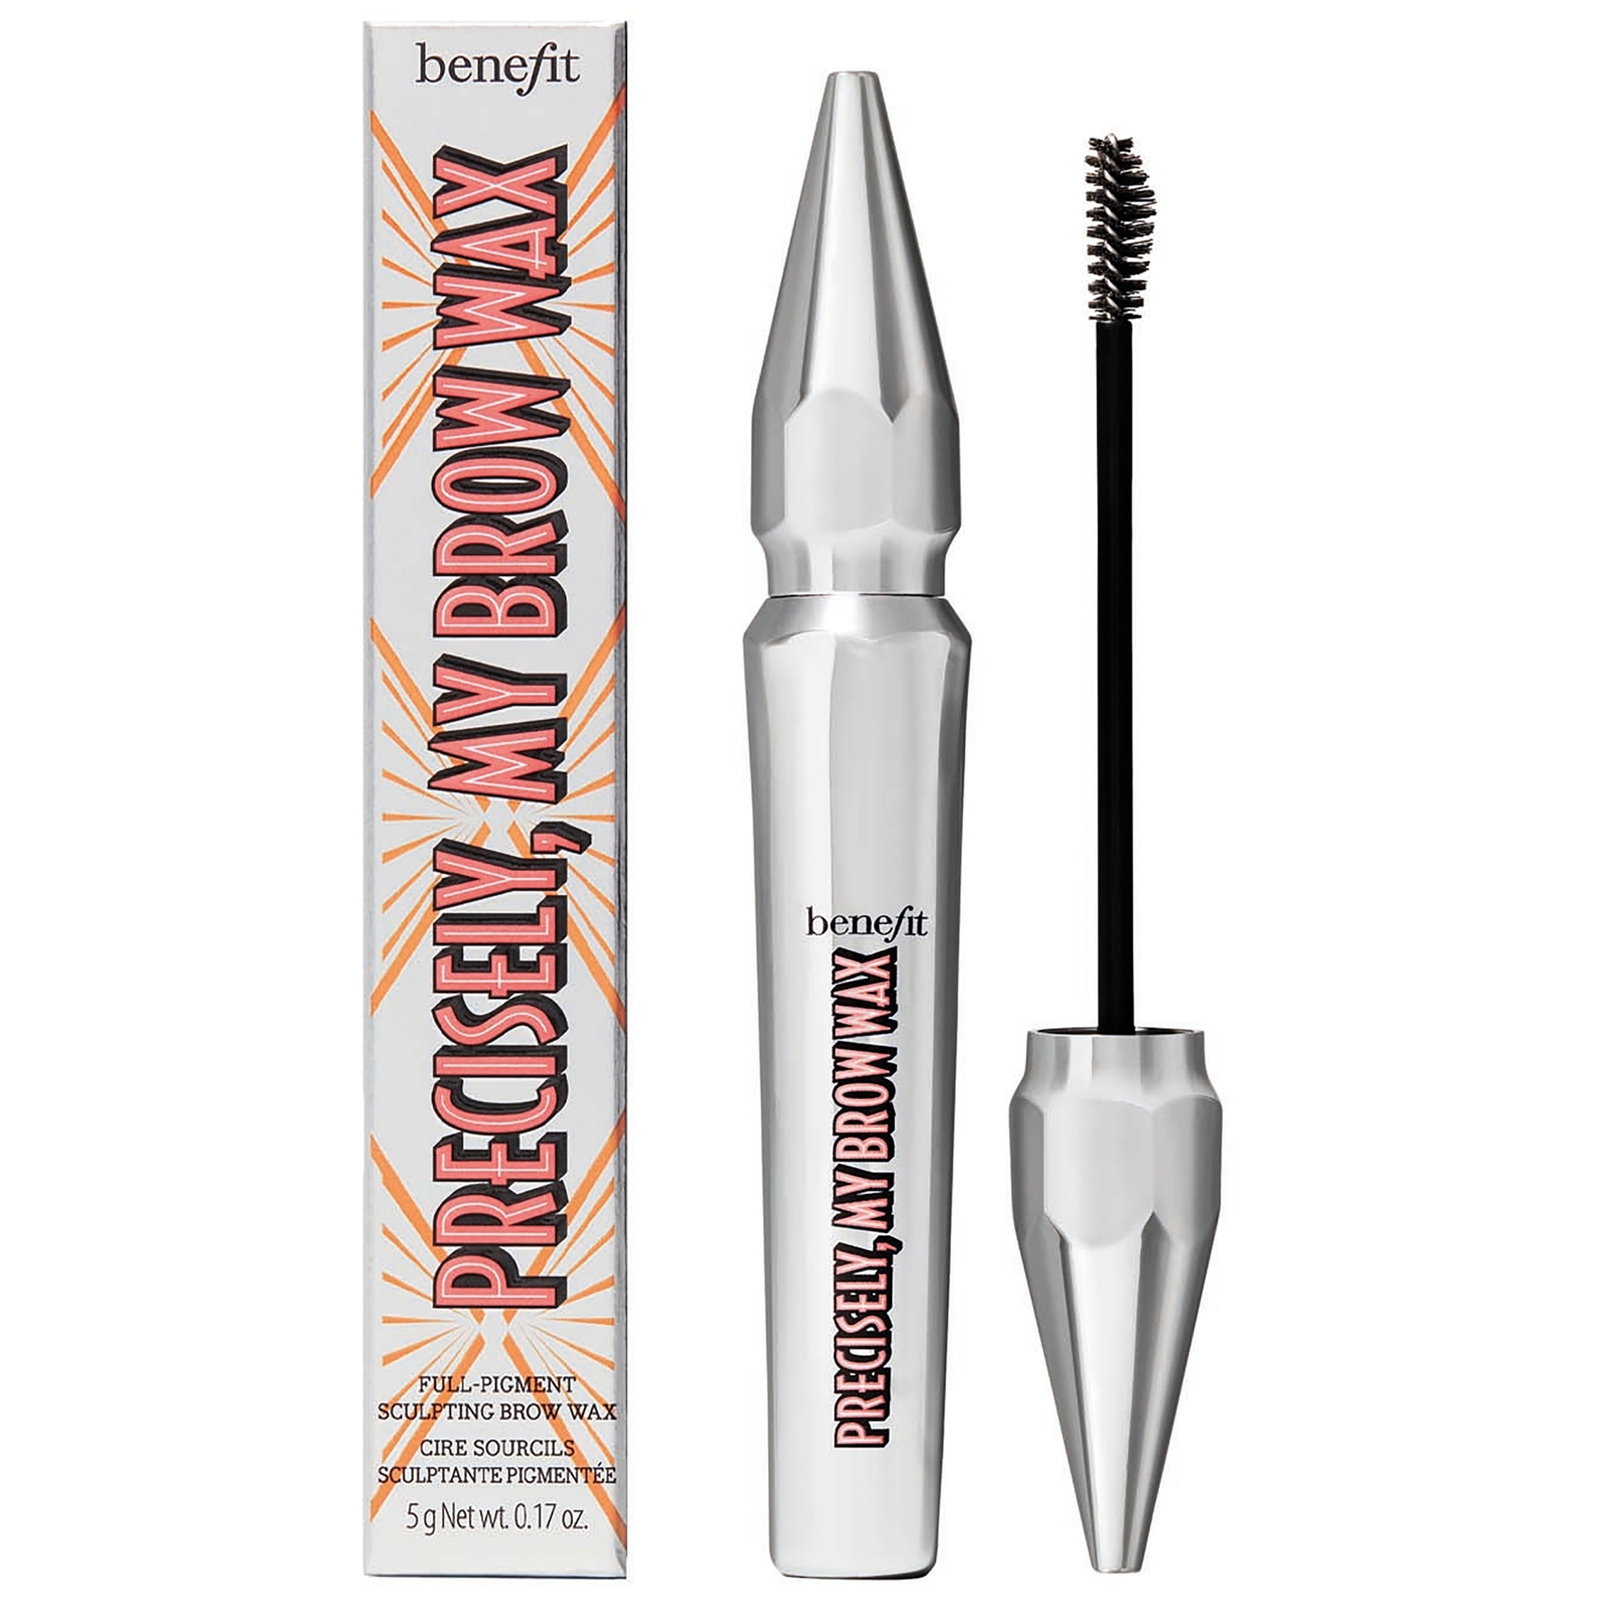 benefit Precisely My Brow Full Pigment Sculpting Brow Wax 5g (Various Shades) - 4 Warm Deep Brown